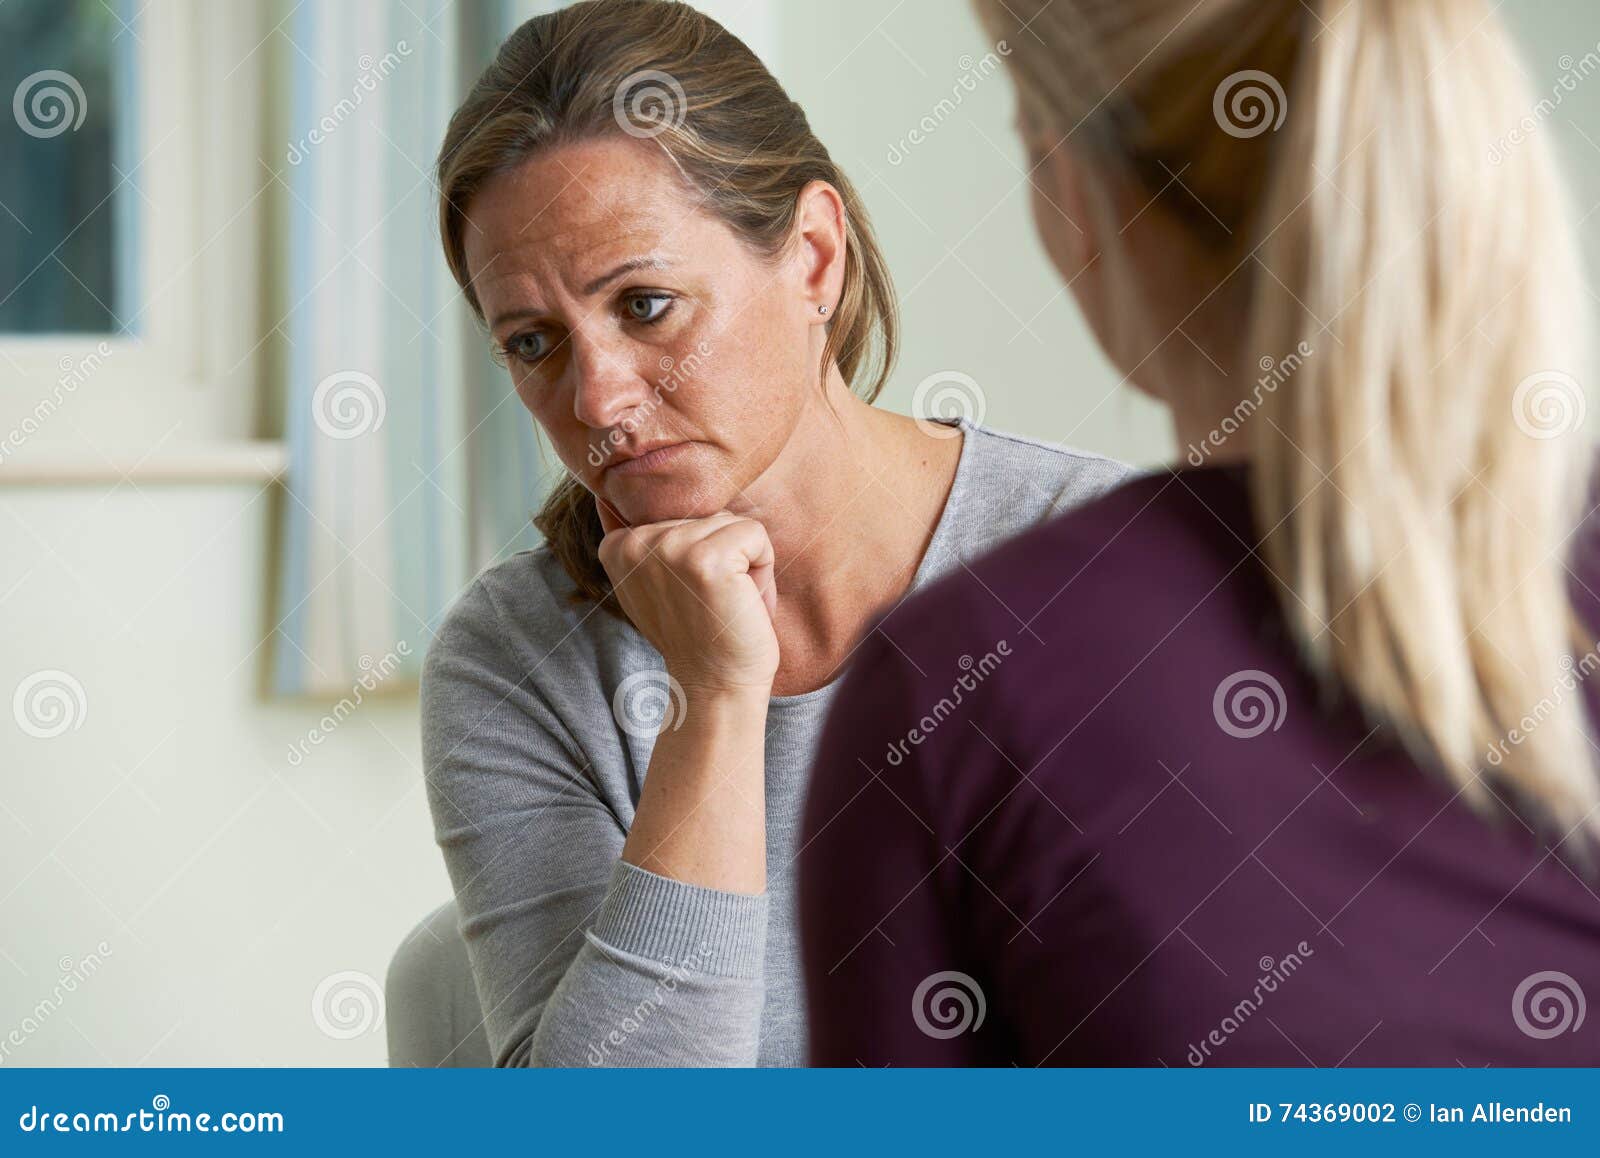 mature woman discussing problems with counselor